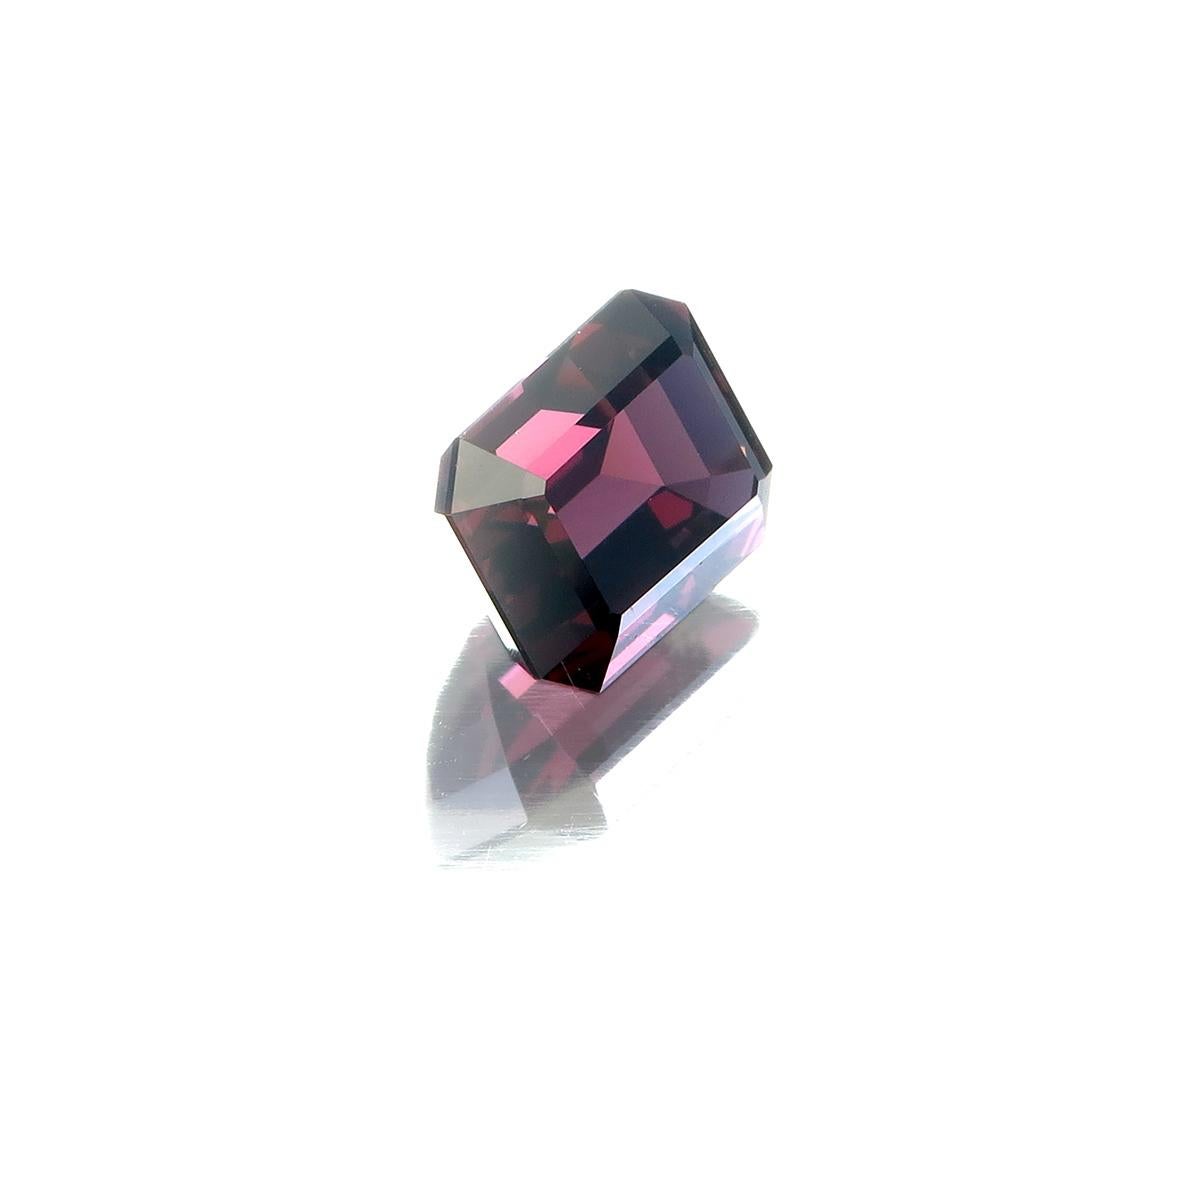 Lotus certified 2.31 carat Reddish Purple Spinel from Ceylon 
with a rich Reddish Purple saturation and a medium-Deep tone.
Cut: Octagonal
Dimension: 7.84 x 6.34 x 4.94 mm
No treatment  
Origin: Sri Lanka  ( Ceylon ) Know in the past variously as